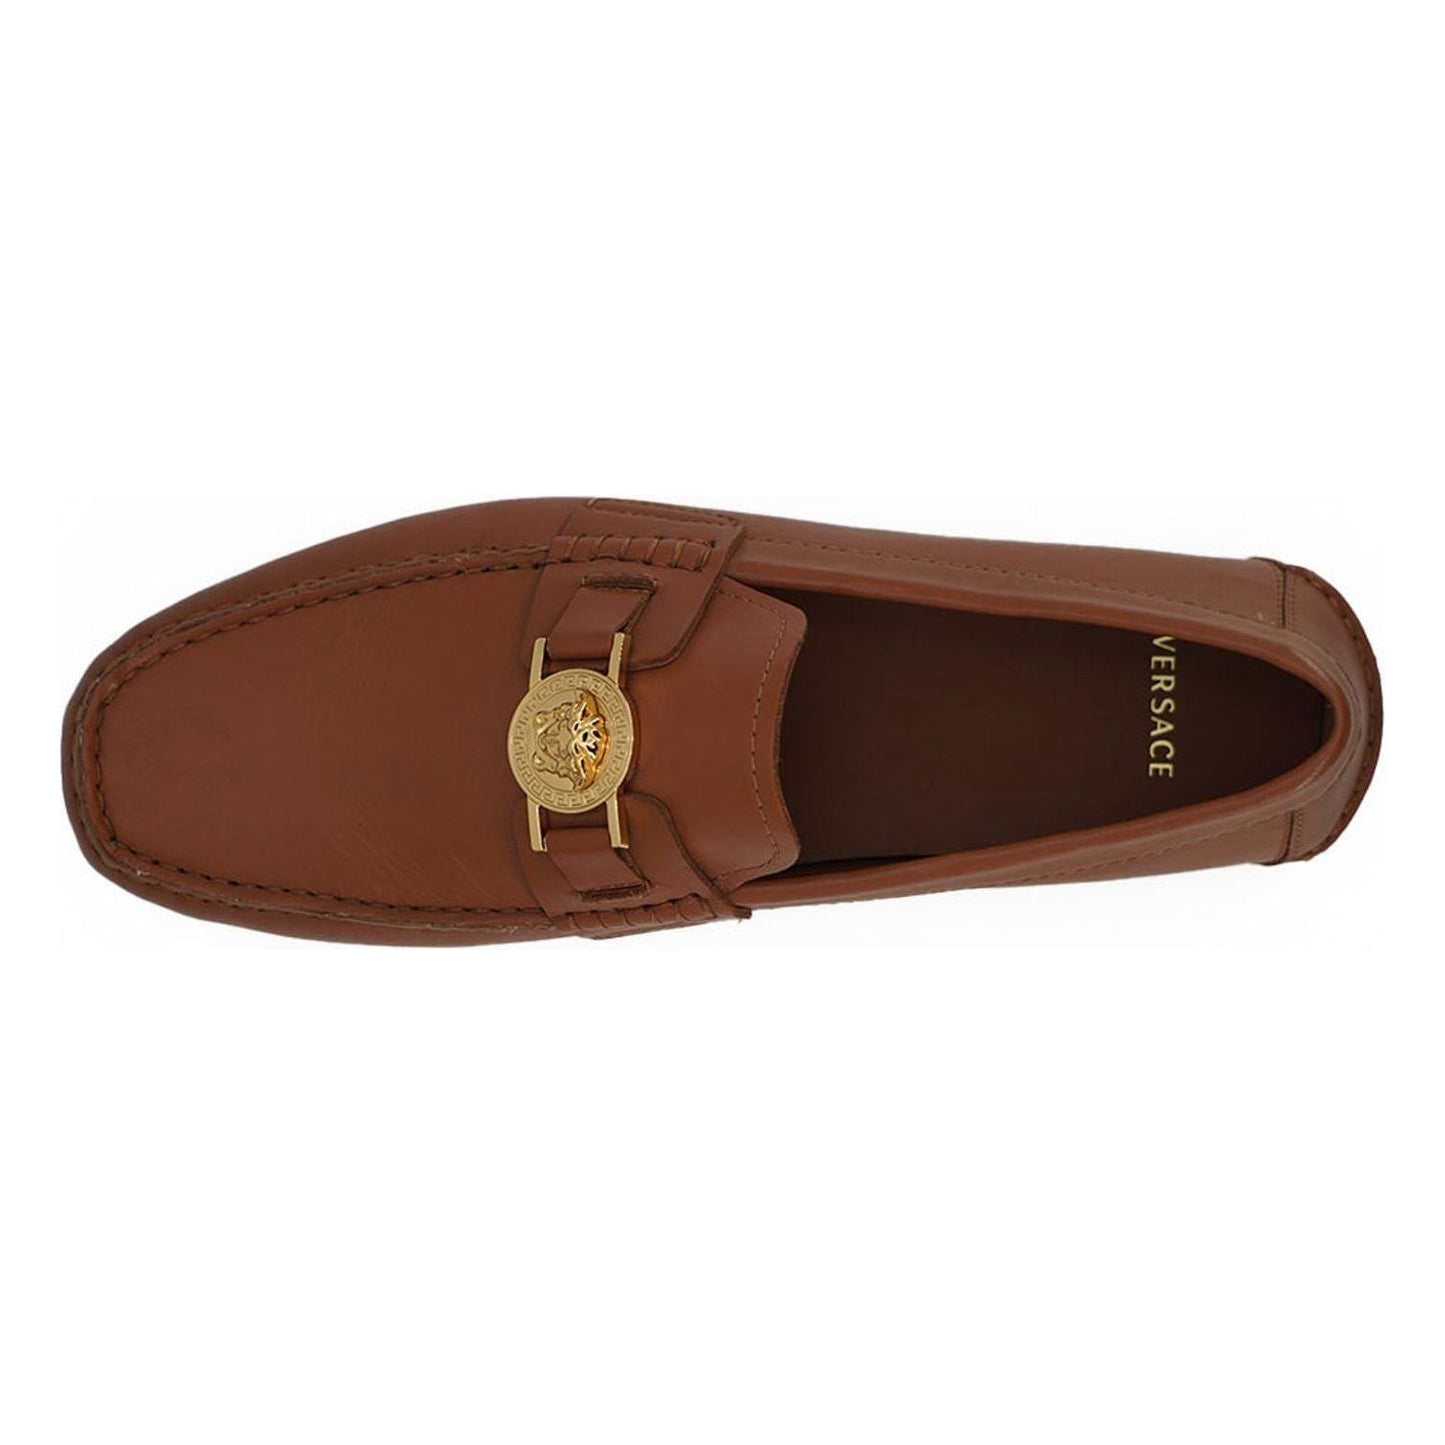 Versace Elegant Medusa-Embossed Leather Loafers natural-brown-calf-leather-loafers-shoes V70062-1-868f3ad9-80e.jpg